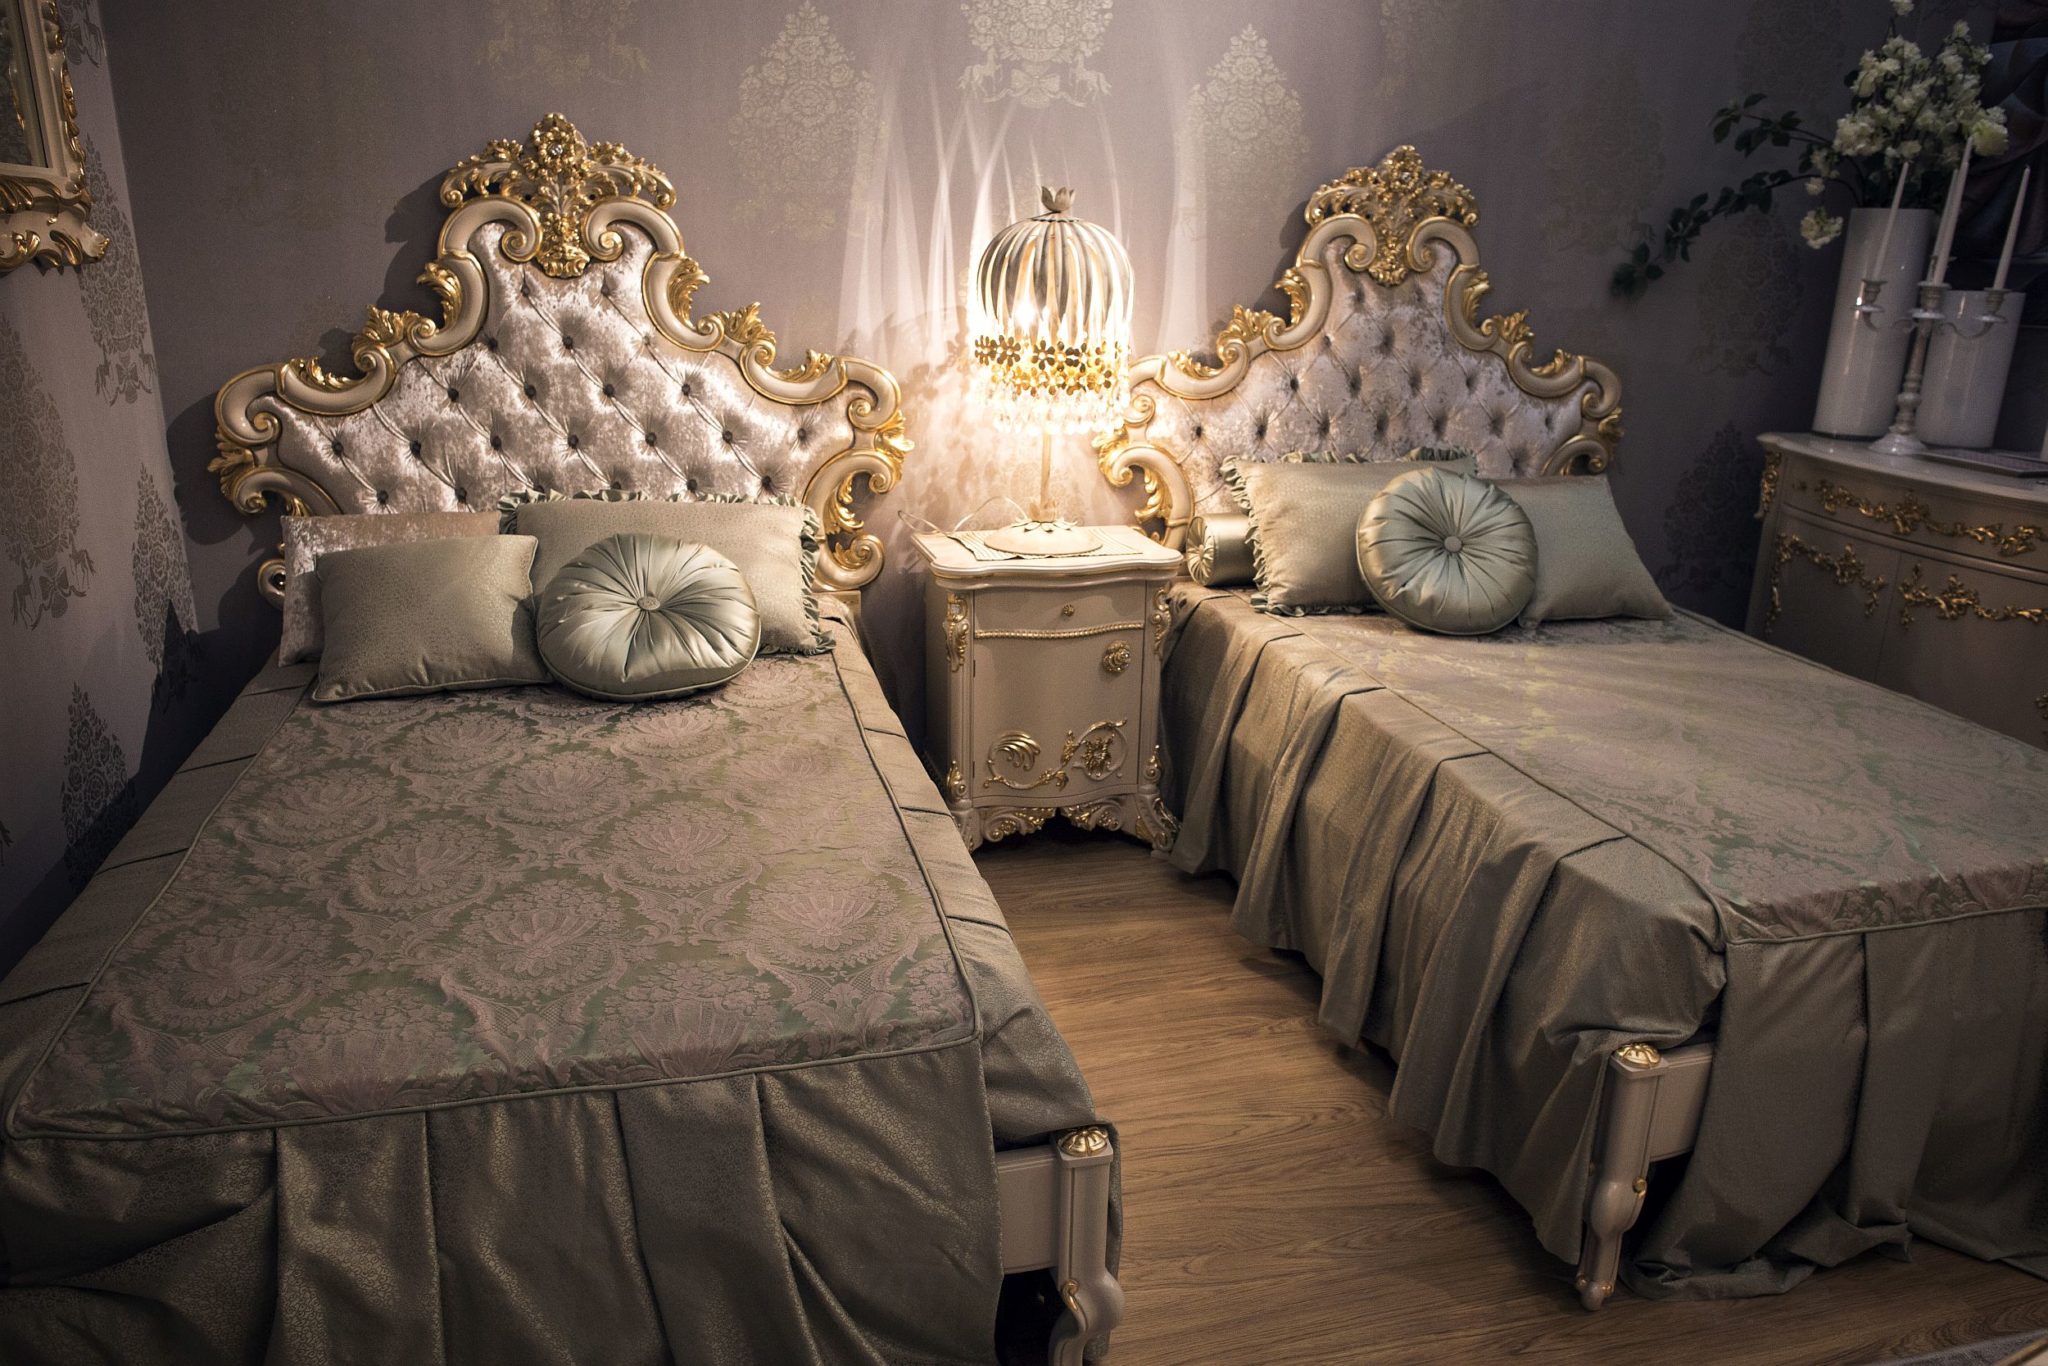 Imperial-and-classic-bedroom-collection-from-Alberto-Mario-ghezzani